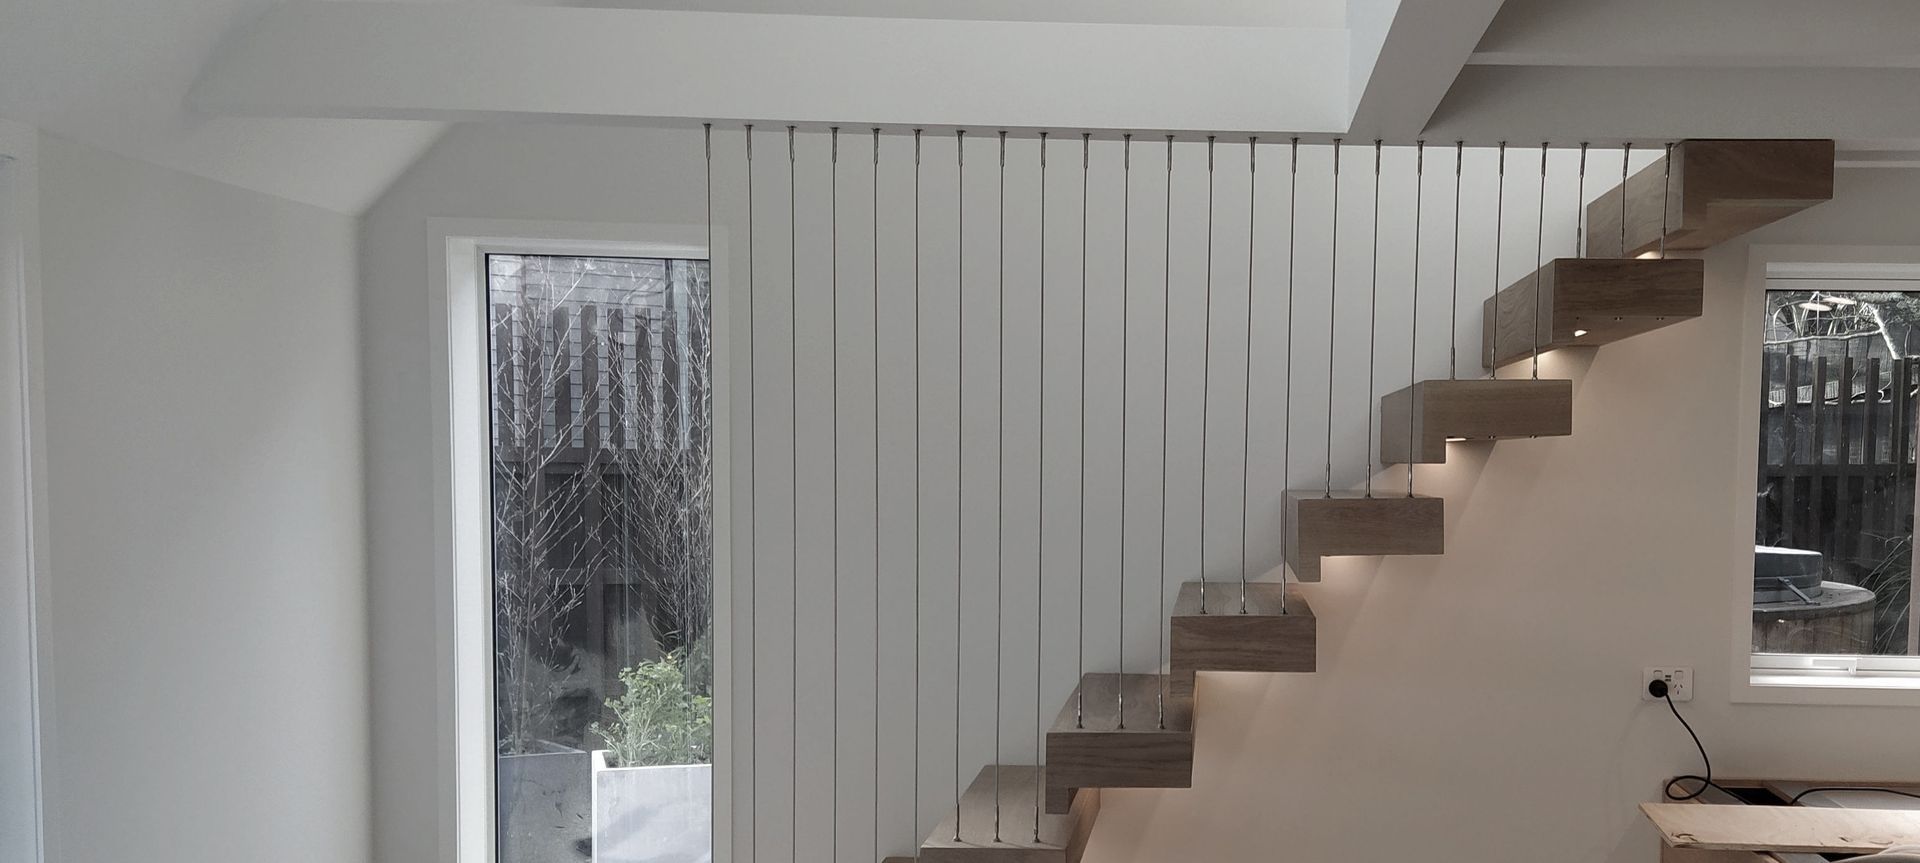 Floating stairs - residential wire balustrade infill banner